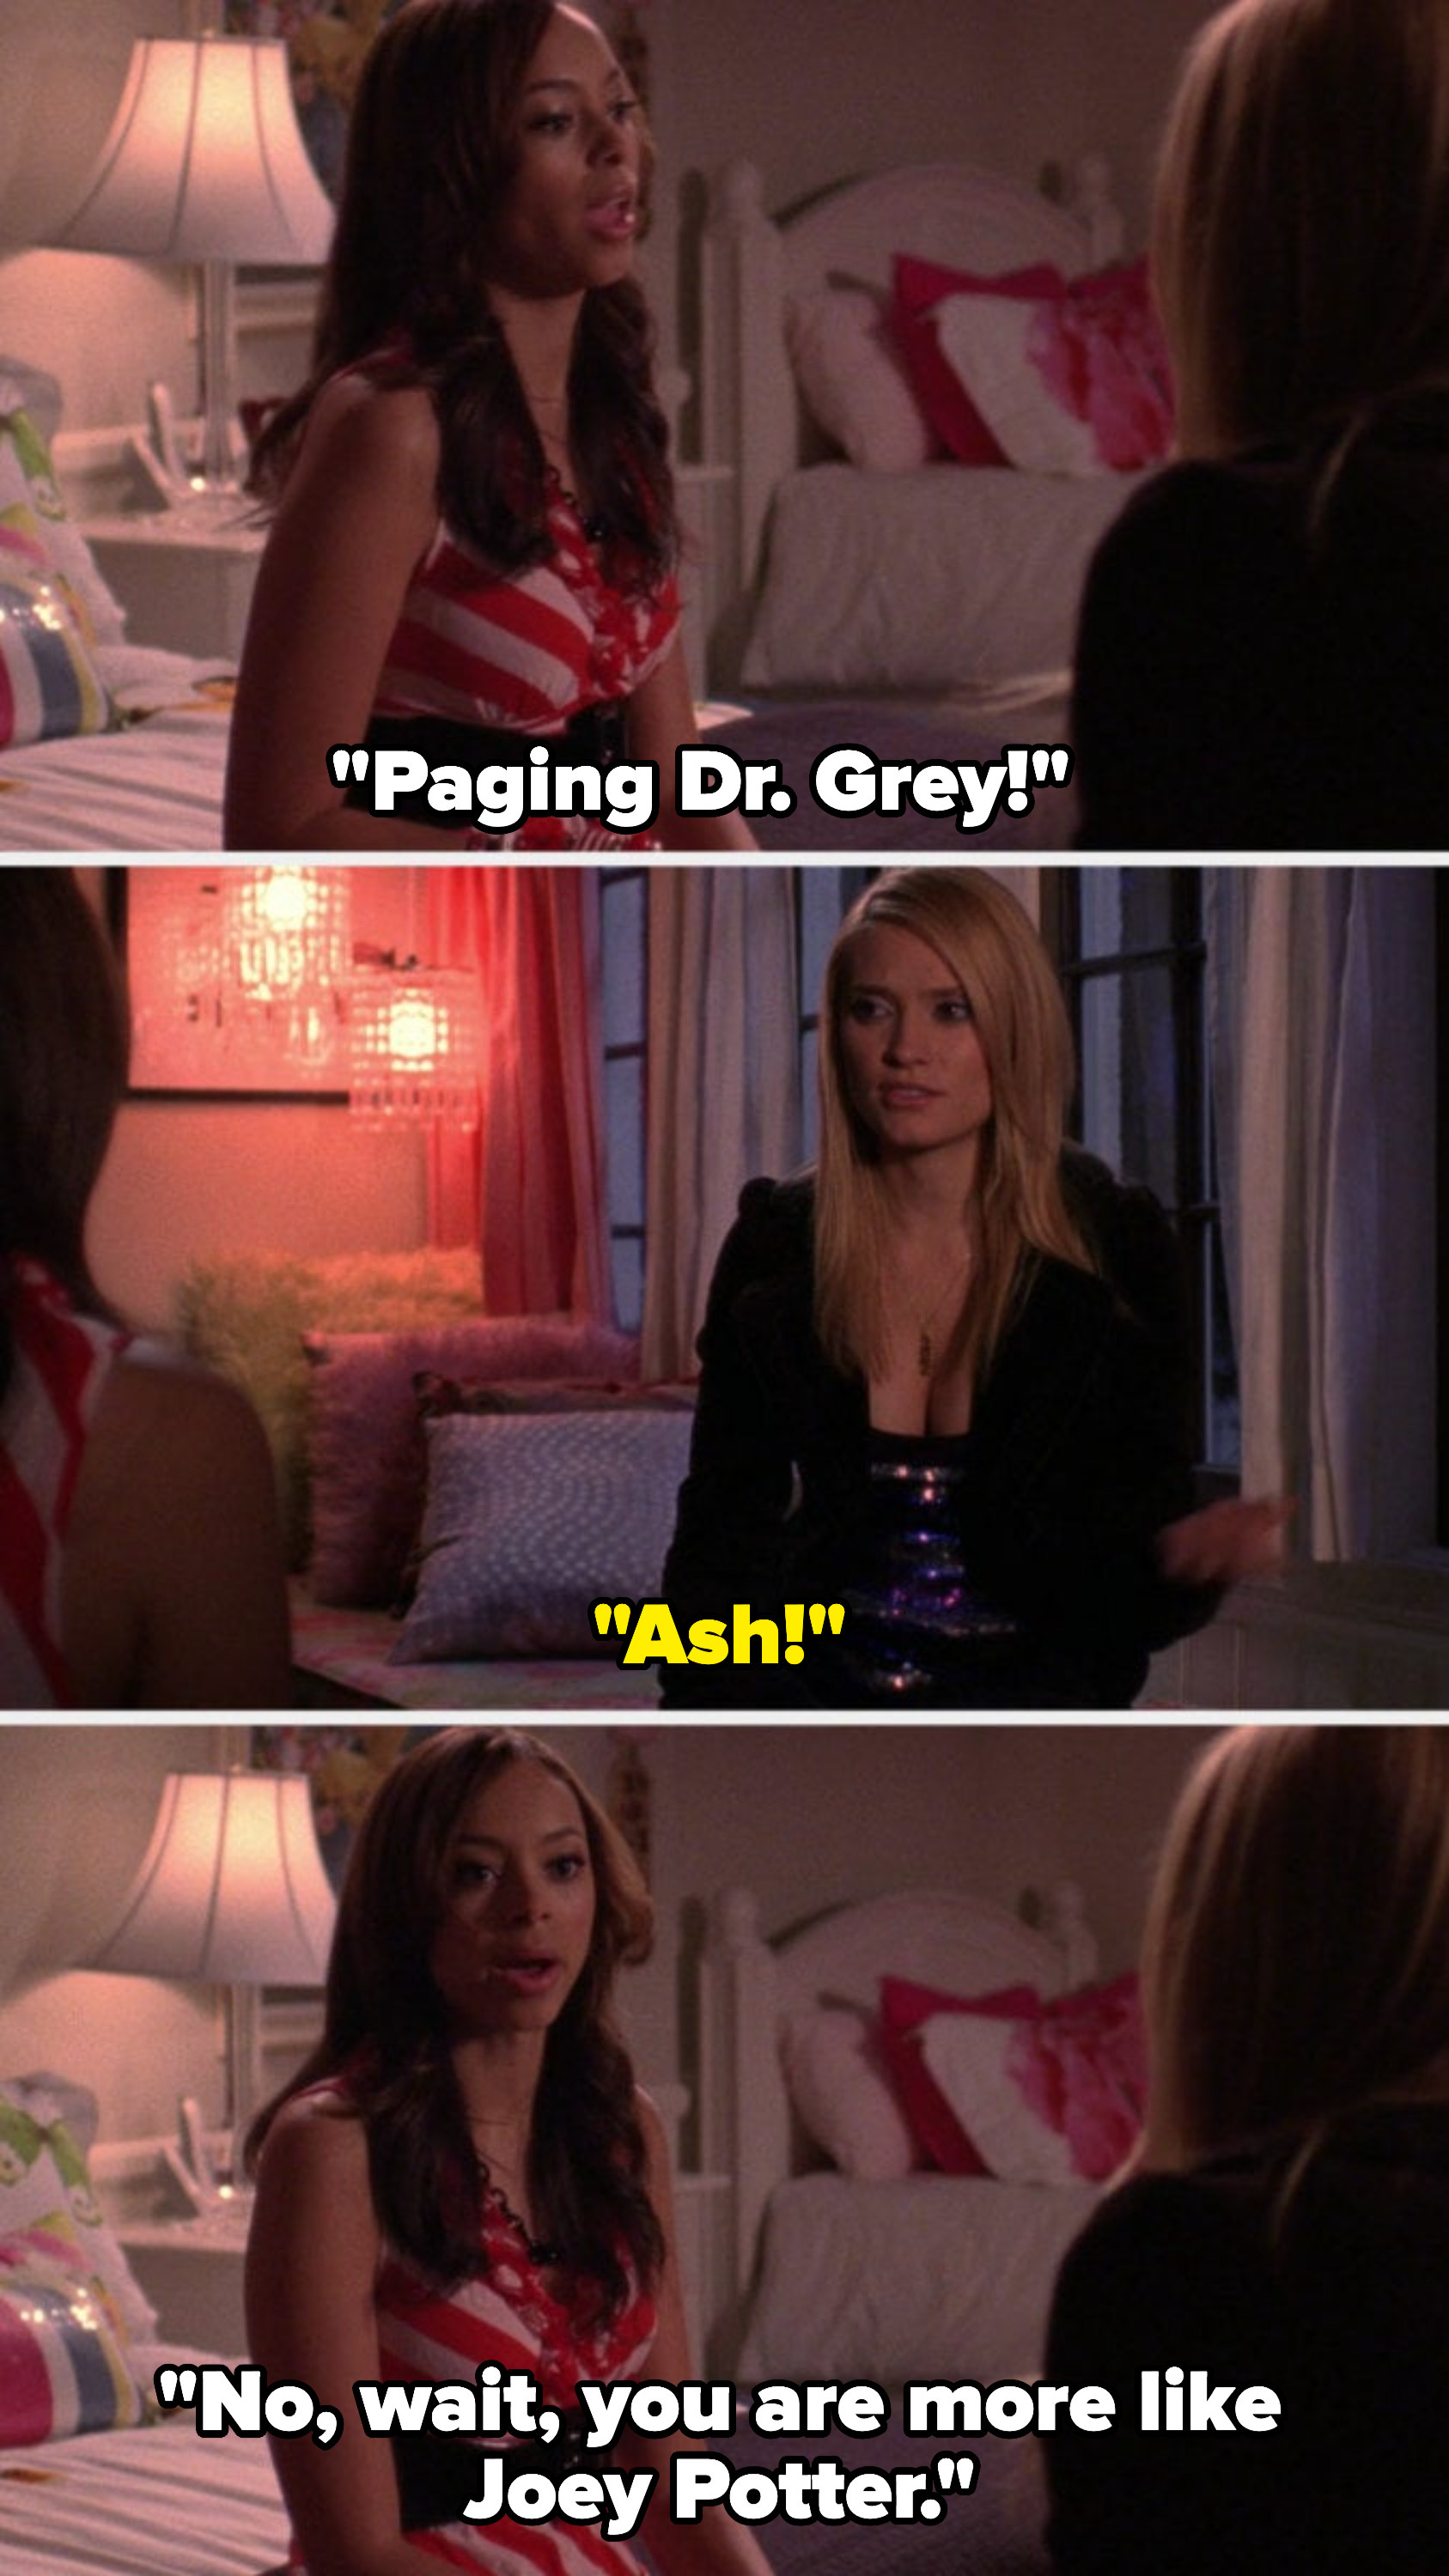 Ashleigh says &quot;Paging Dr. Grey!&quot; and Casey says &quot;Ash!&quot; Then Ashleigh says &quot;No, wait, you are more like Joey Potter&quot;